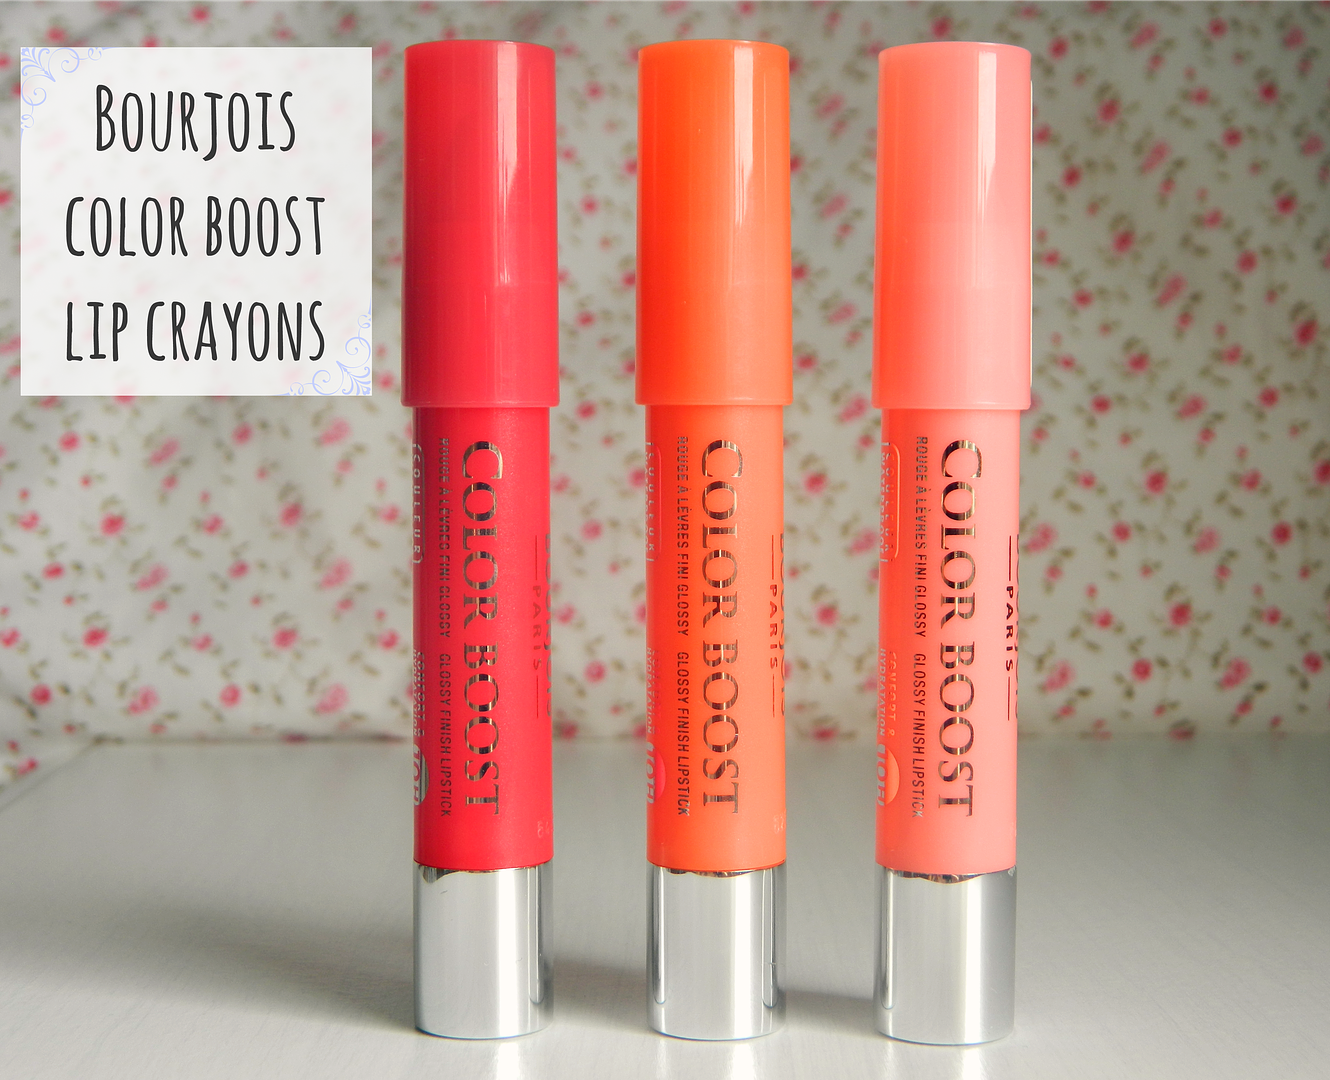 Bourjois Color Boost Lip Crayons Red Sunrise Orange Punch Peach On The Beach Review Belle-amie UK Beauty Fashion Lifestyle Blog